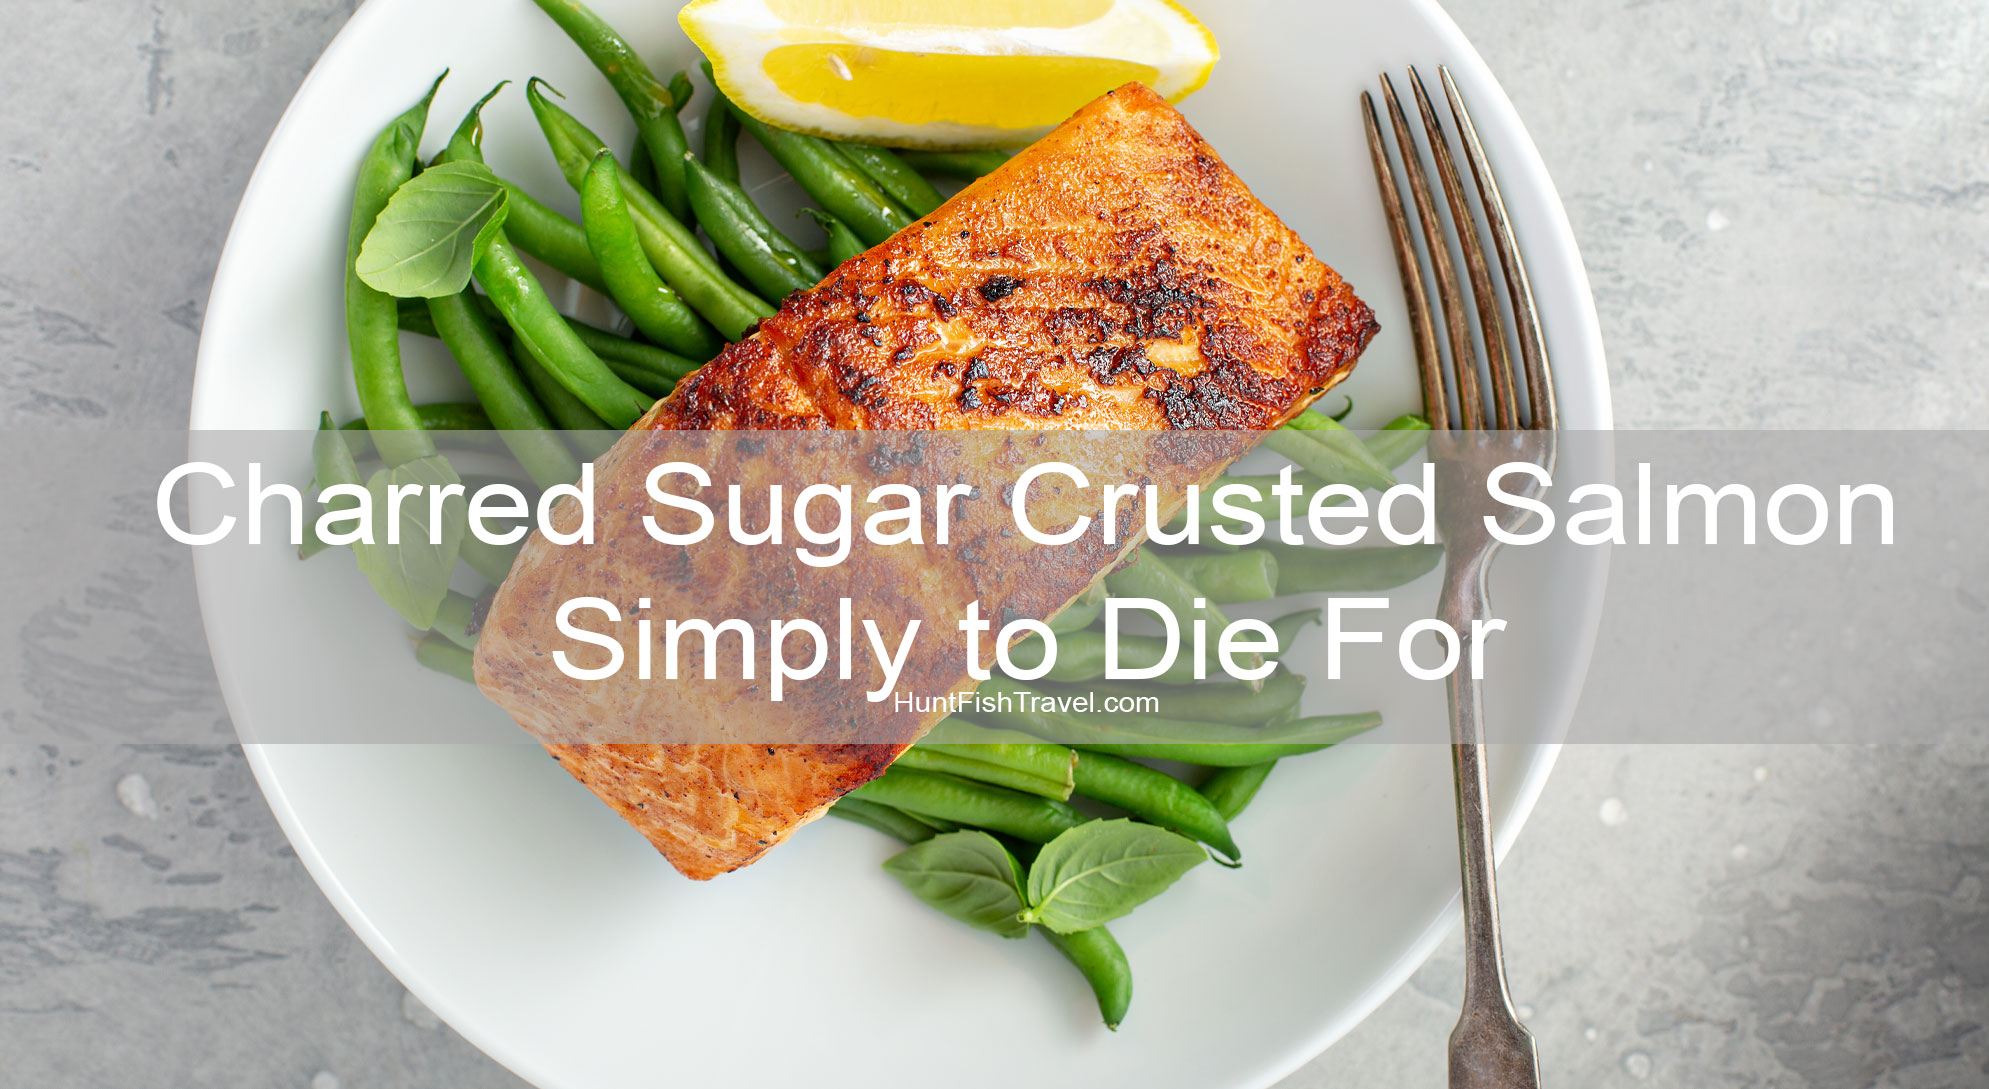 Charred Sugar Crusted Salmon Recipe – Simply to Die For